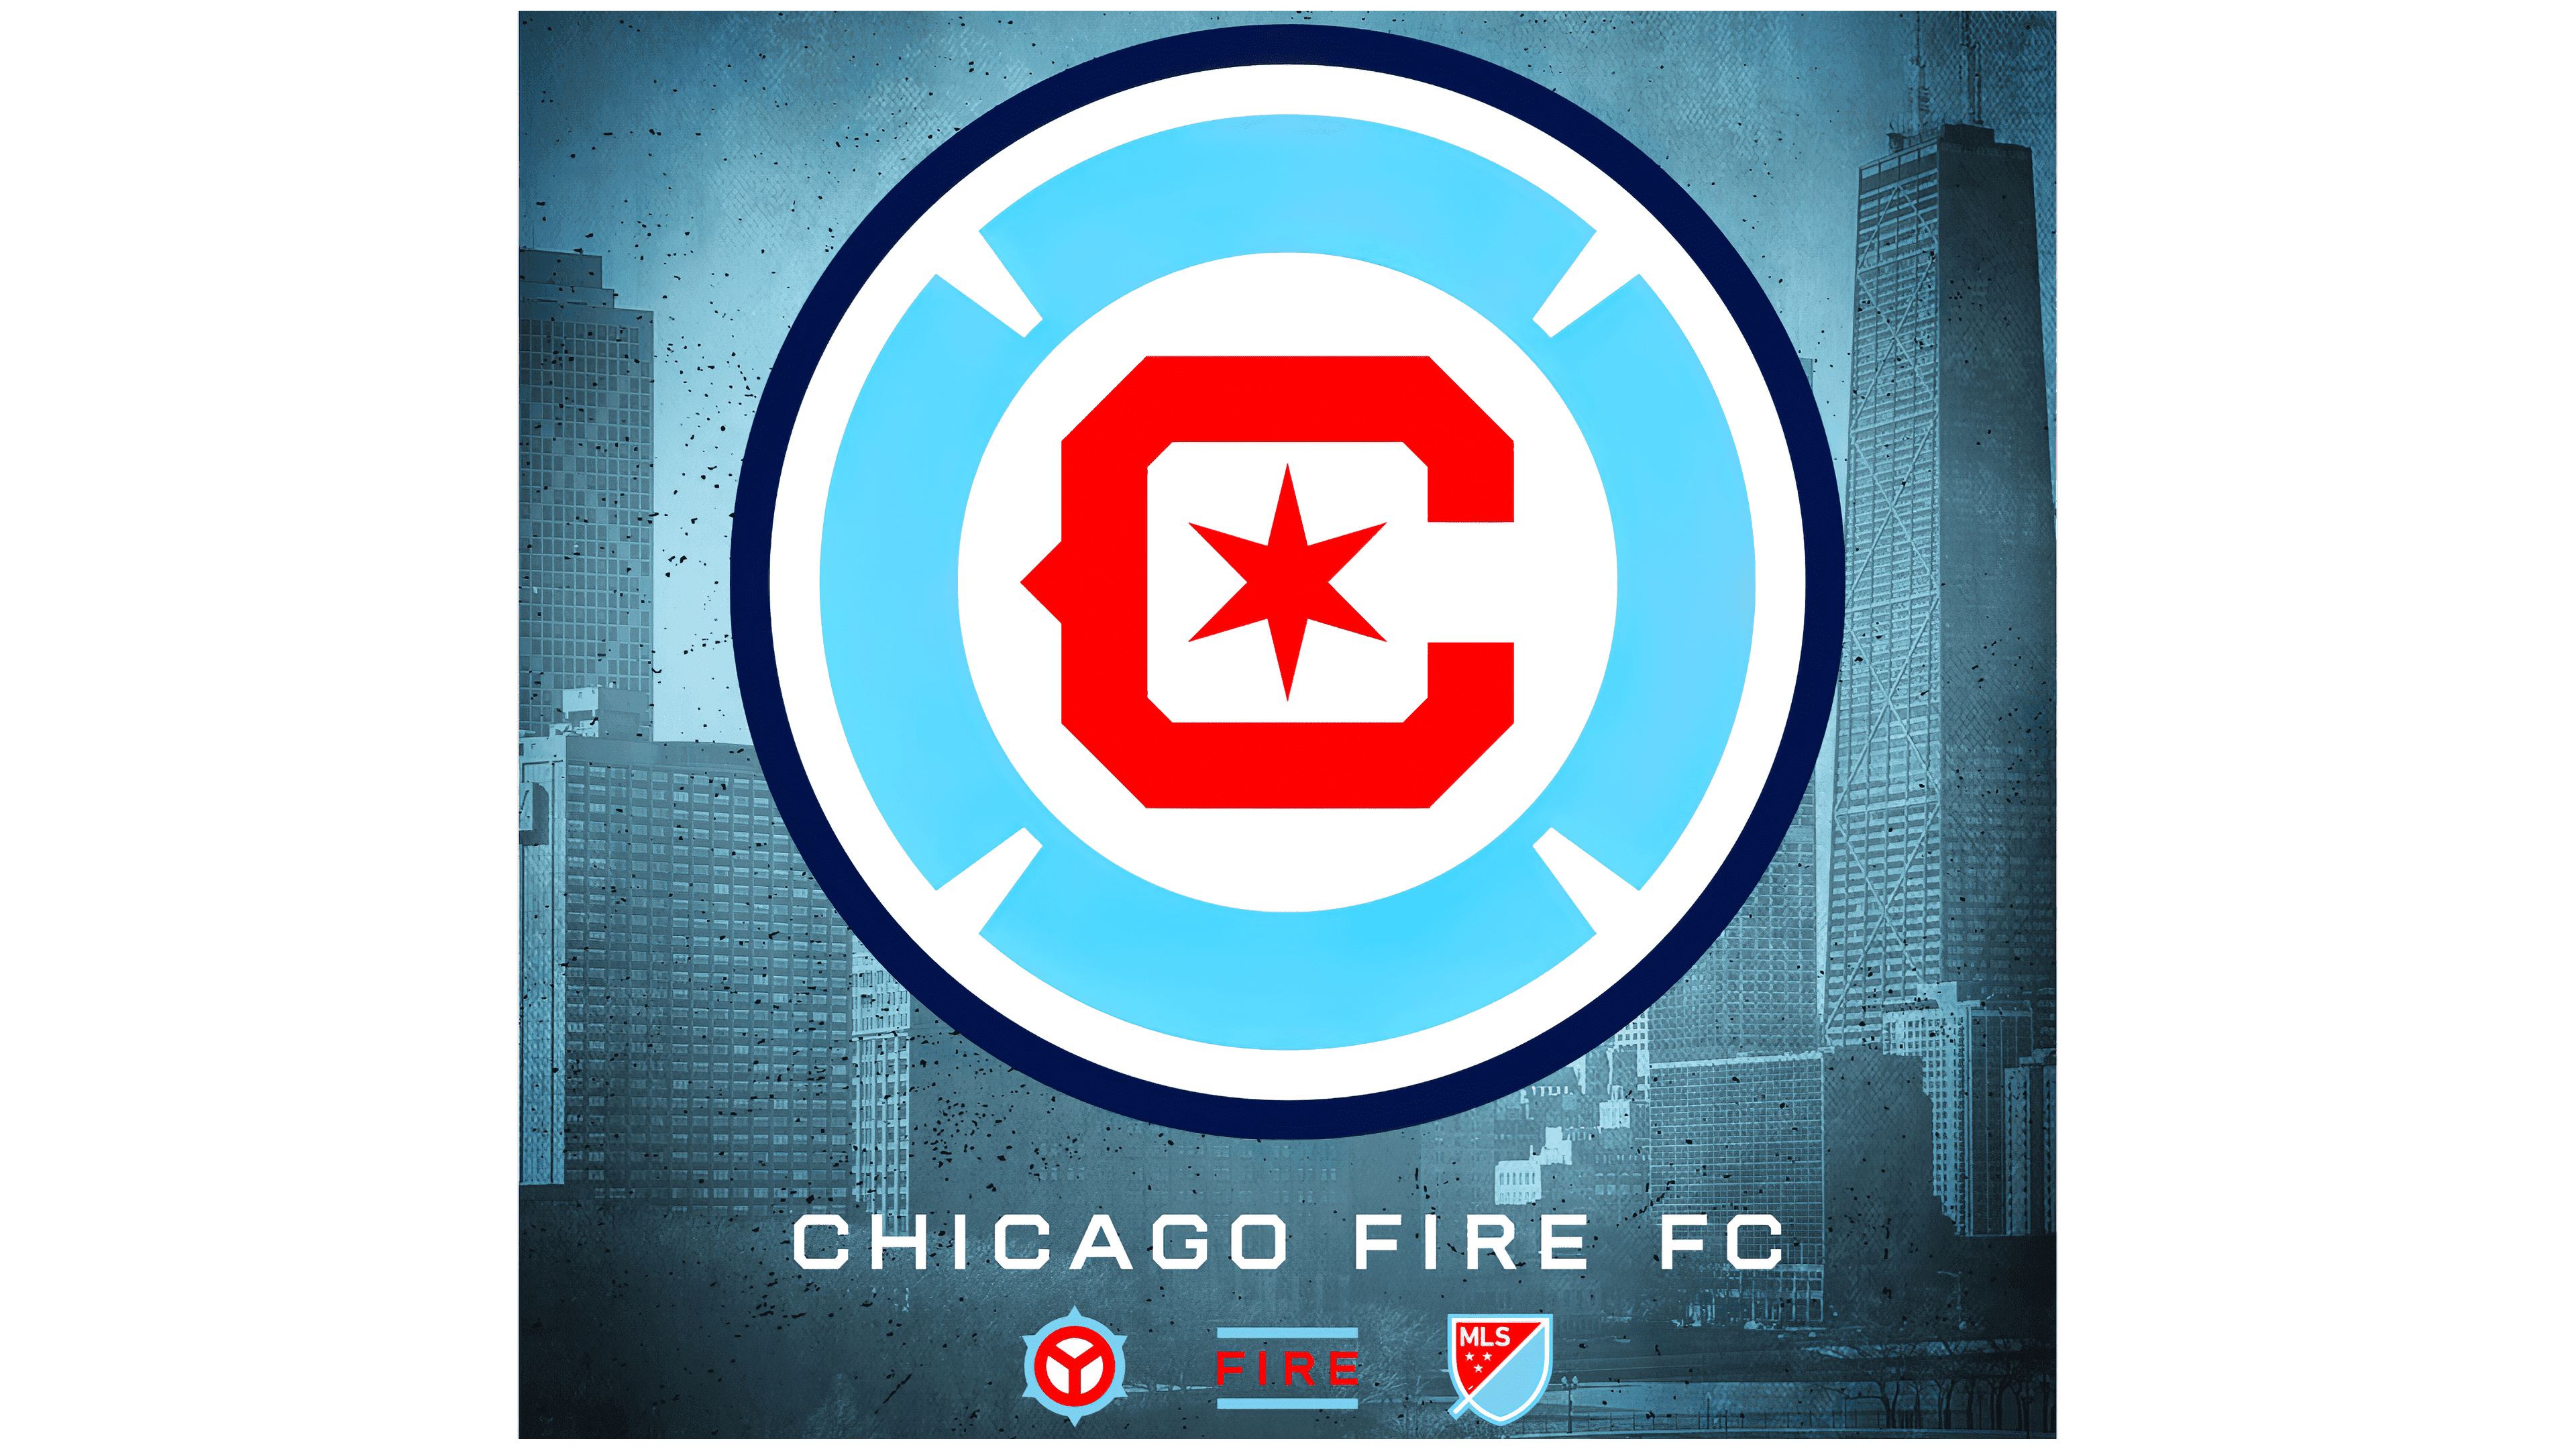 Chicago Fire FC goes to meet fans and changes its logo